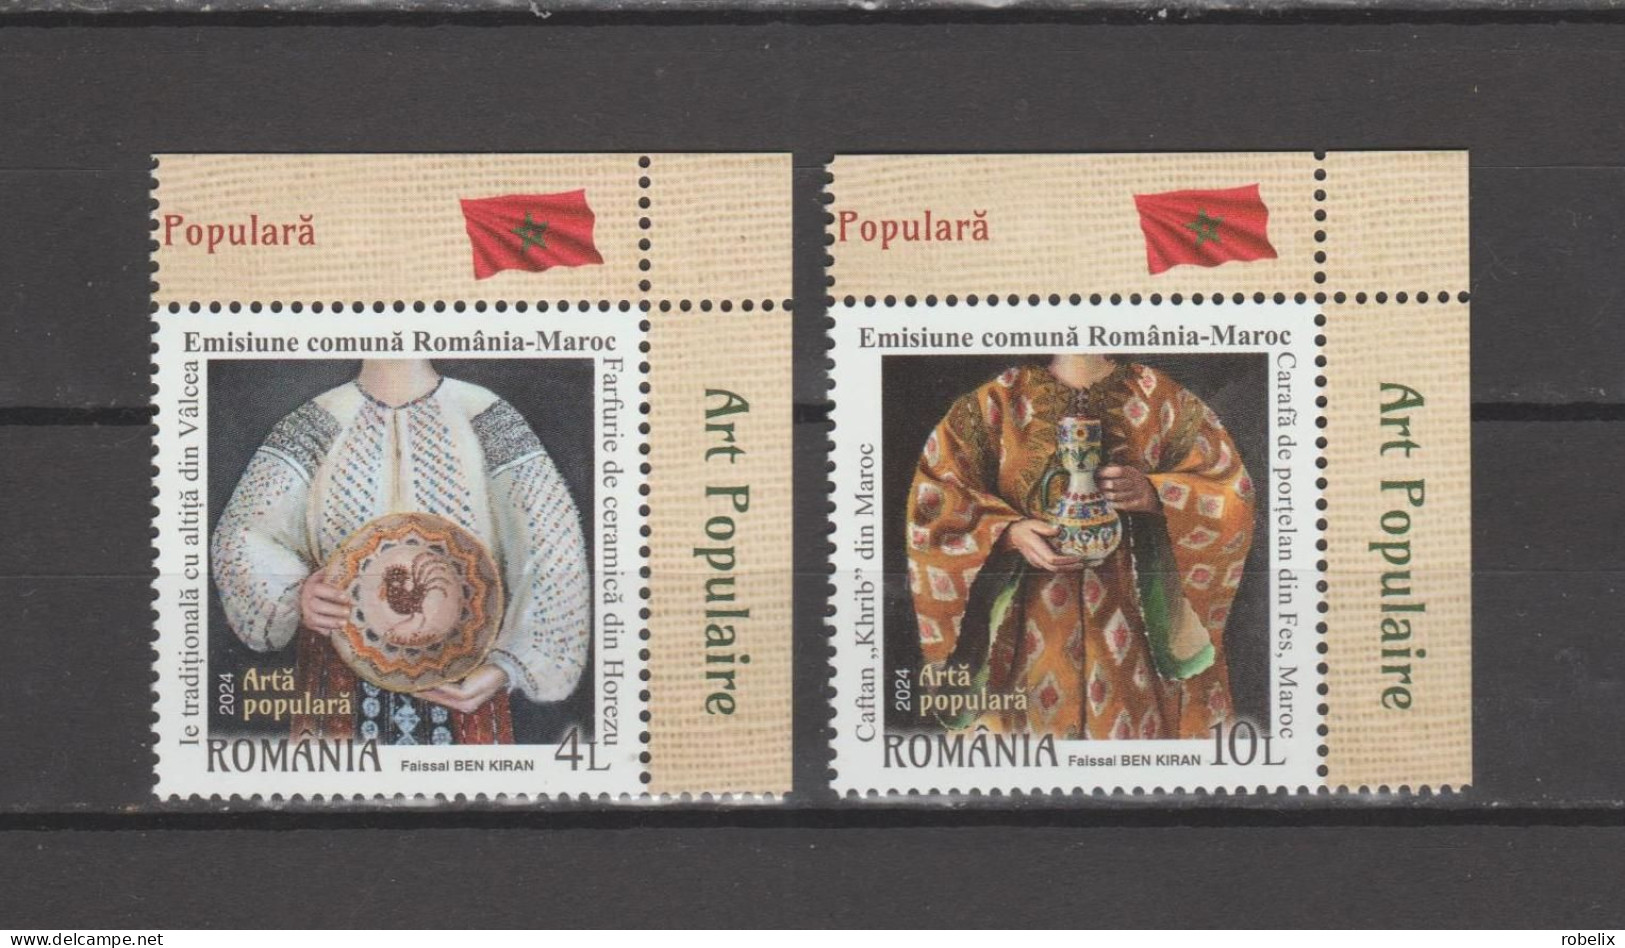 ROMANIA 2024 JOINT ISSUE ROMANIA - MAROC (MOROCCO) - Folk Art  Set Of 2 Stamps MNH** - Emissions Communes